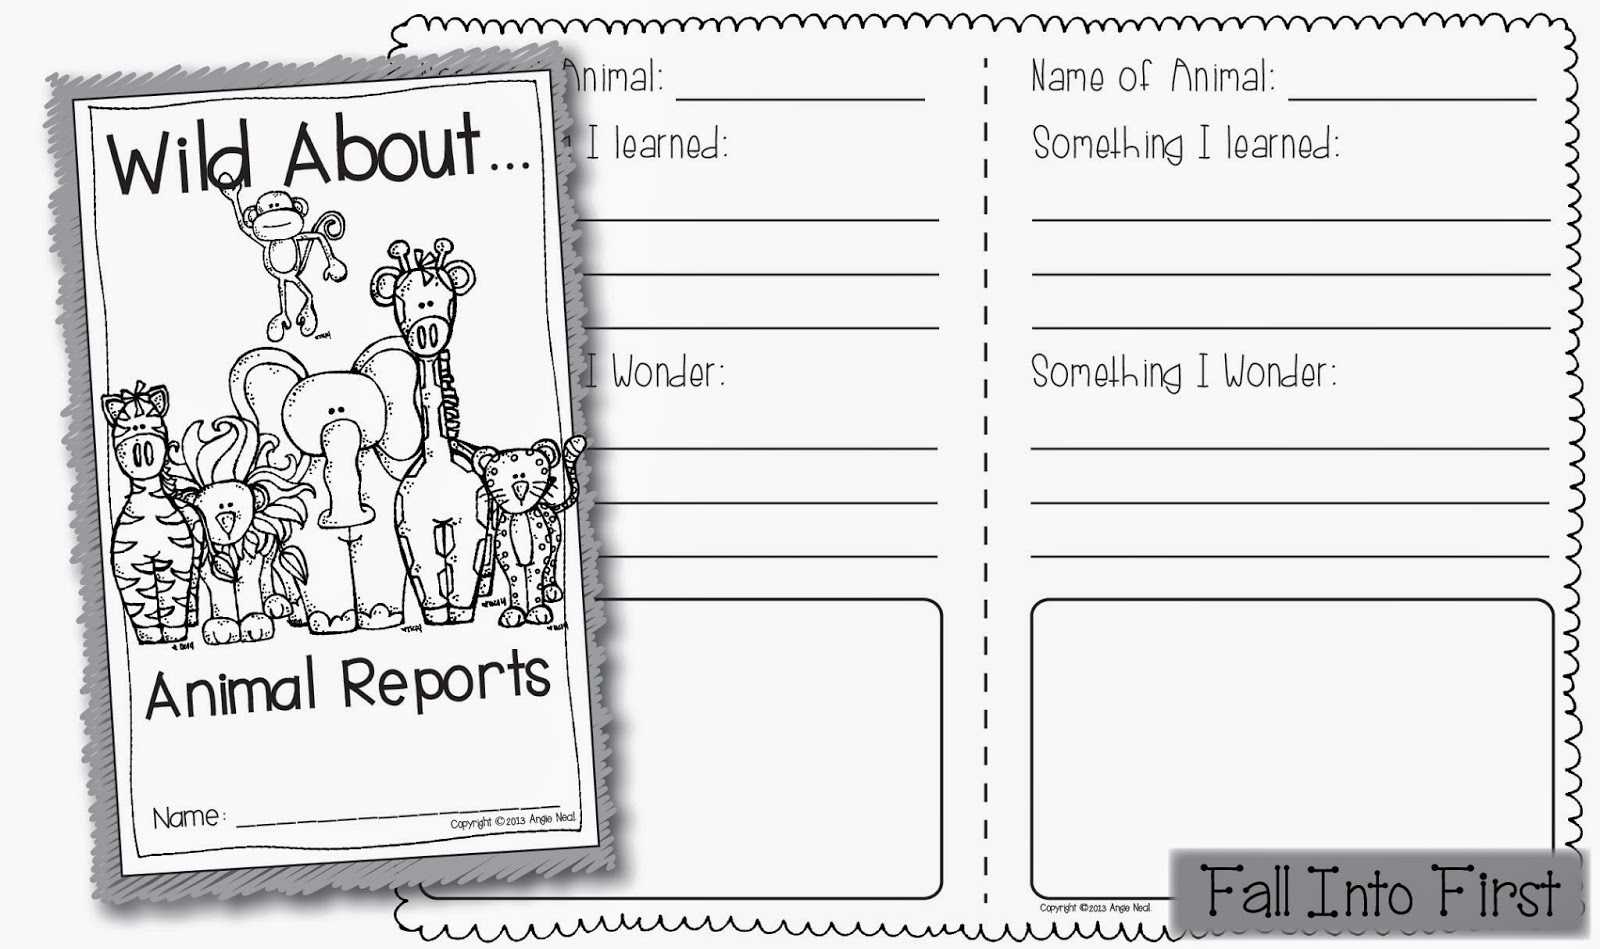 Zoo Animal Worksheet For 2Nd Grade | Printable Worksheets Within Animal Report Template